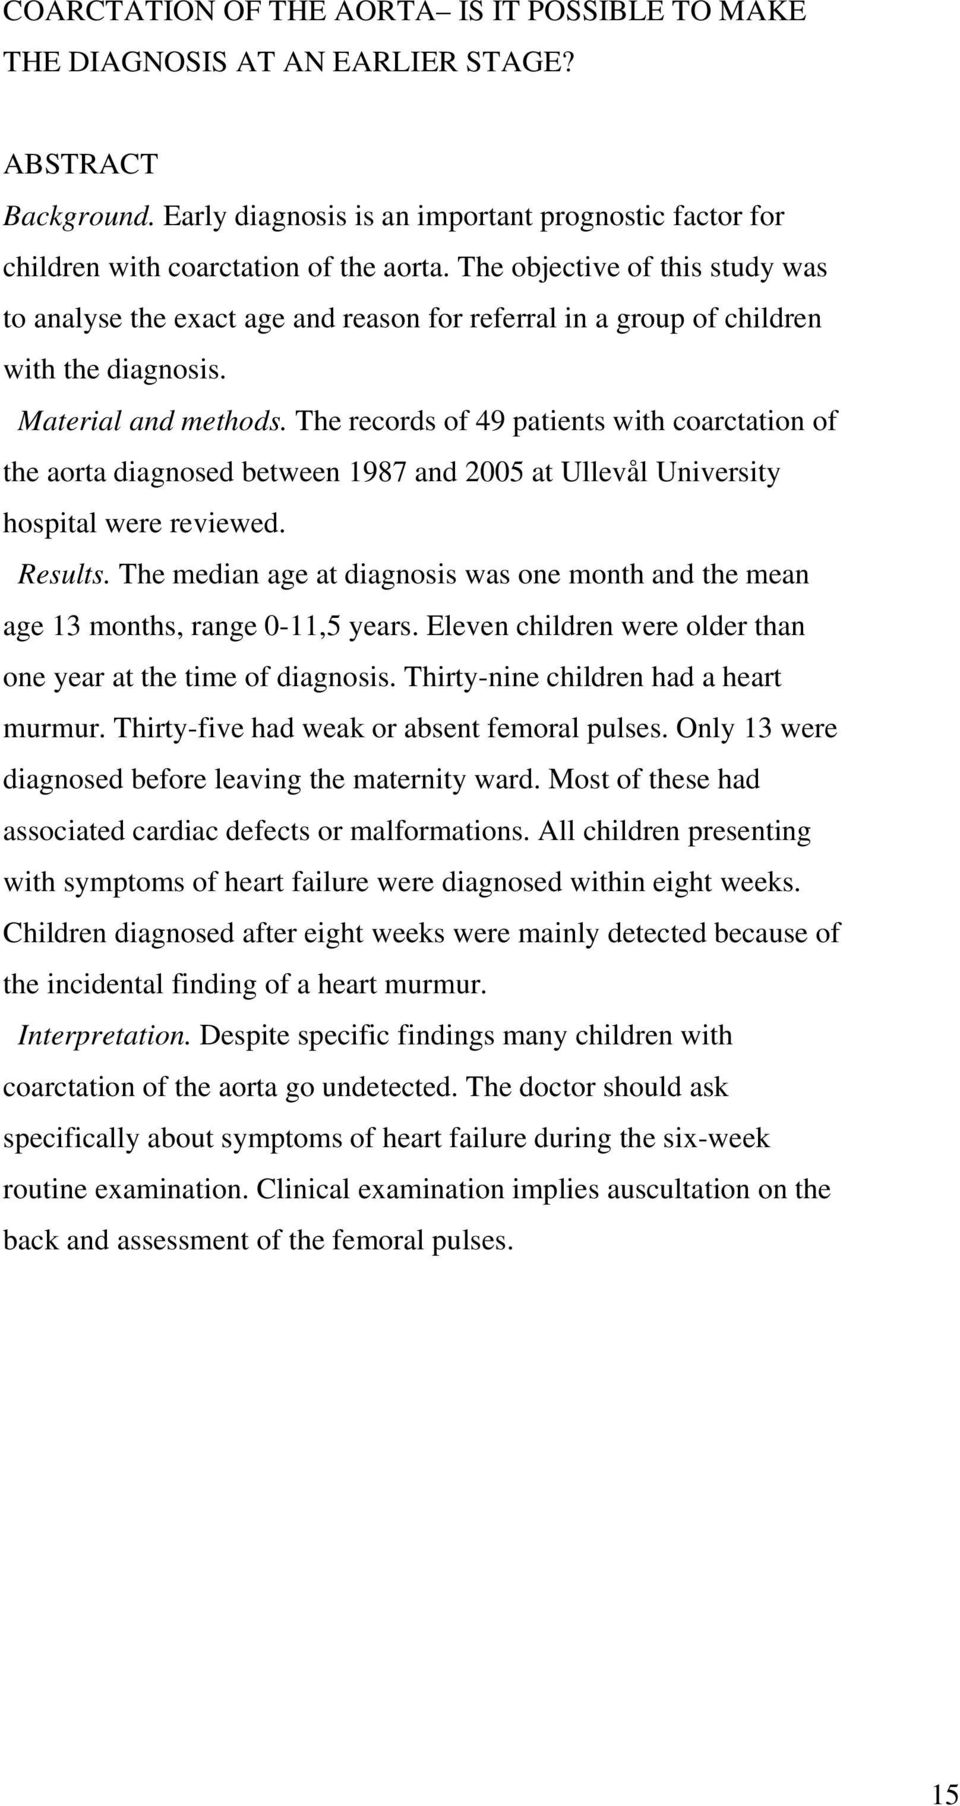 The records of 49 patients with coarctation of the aorta diagnosed between 1987 and 2005 at Ullevål University hospital were reviewed. Results.